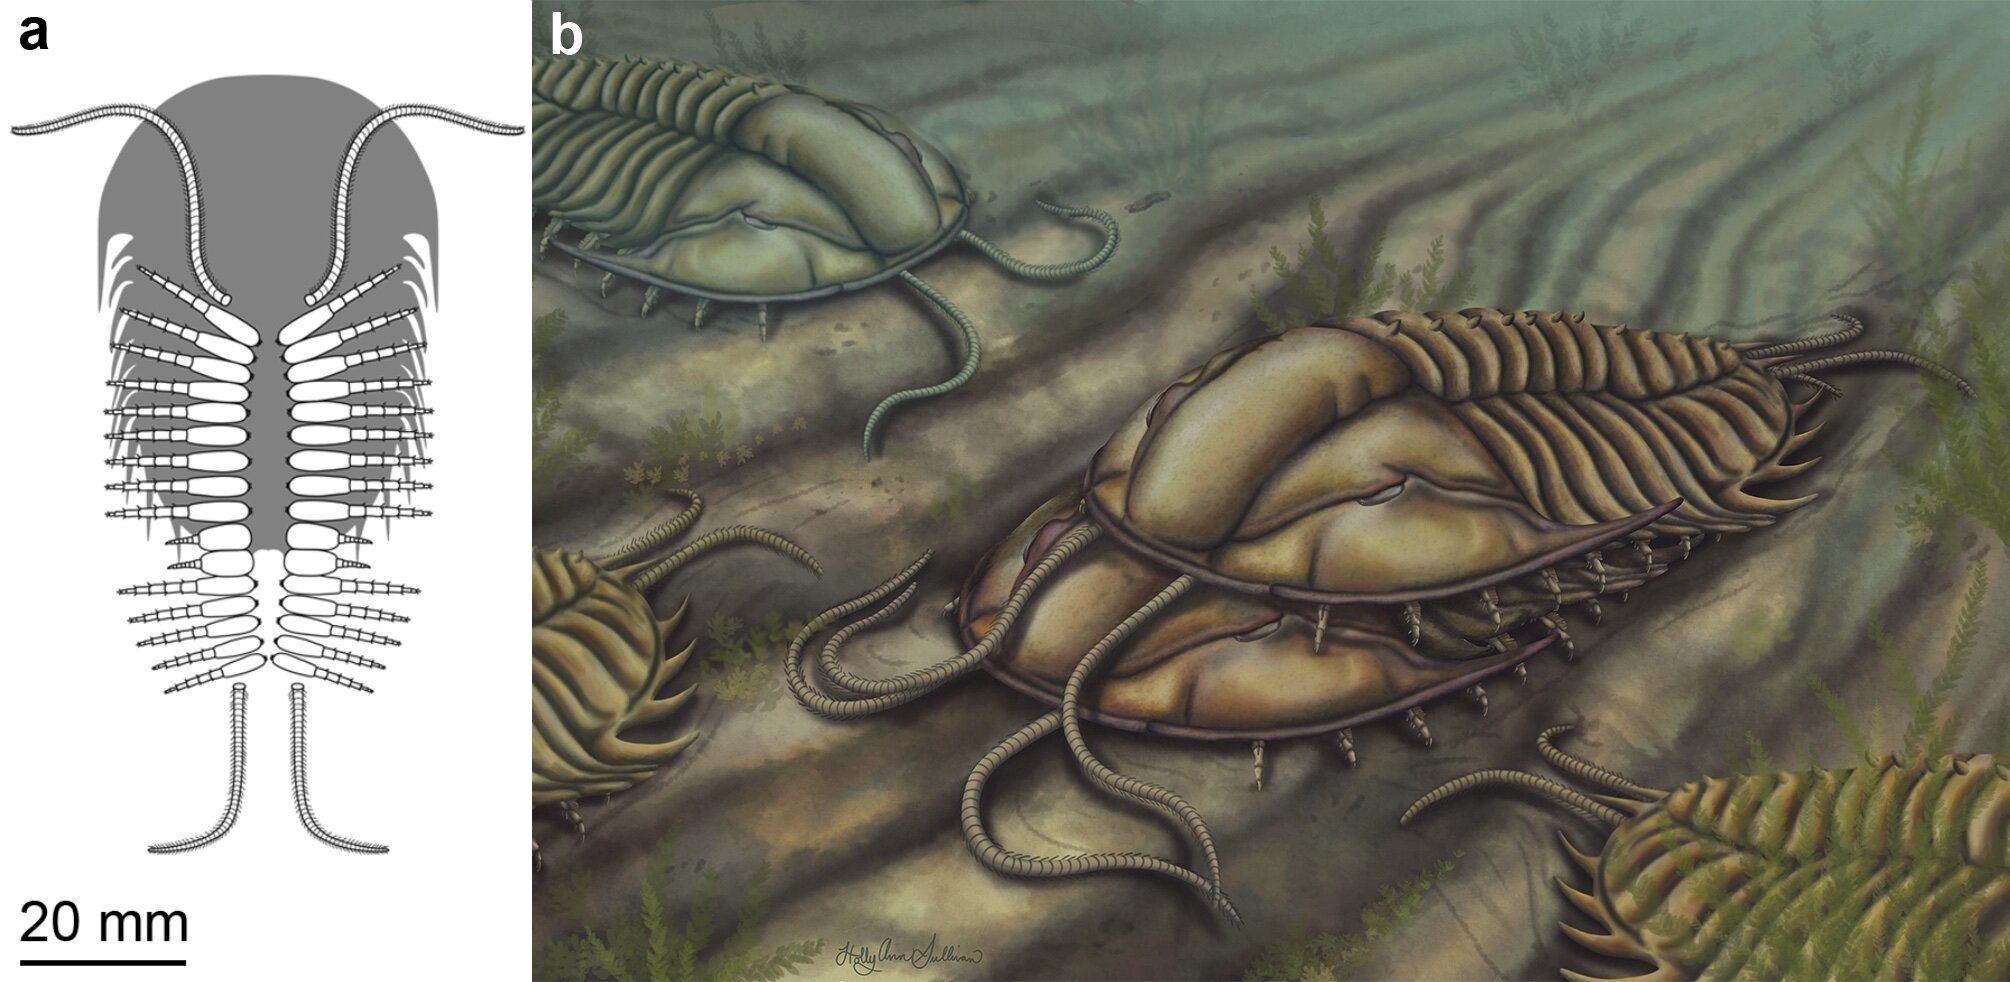 Clasper appendages discovered in mid-Cambrian trilobite show horseshoe crab-like mating behavior